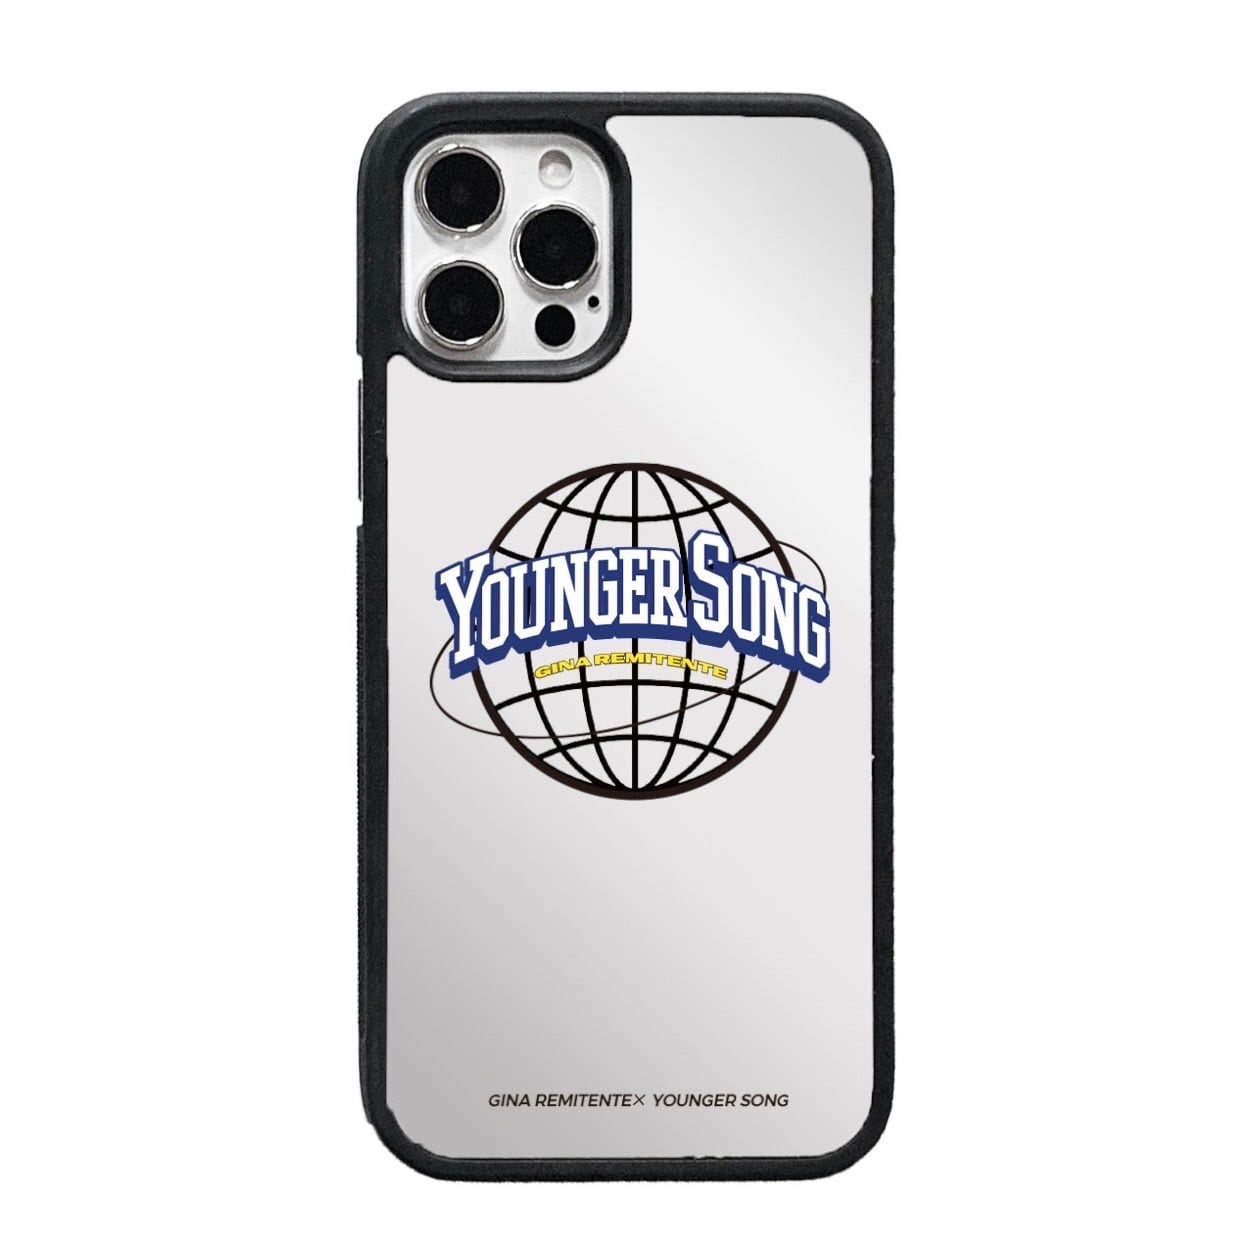 YOUNGER SONG×GINA REMITENTE MIRROR CASE | Gina Remitente